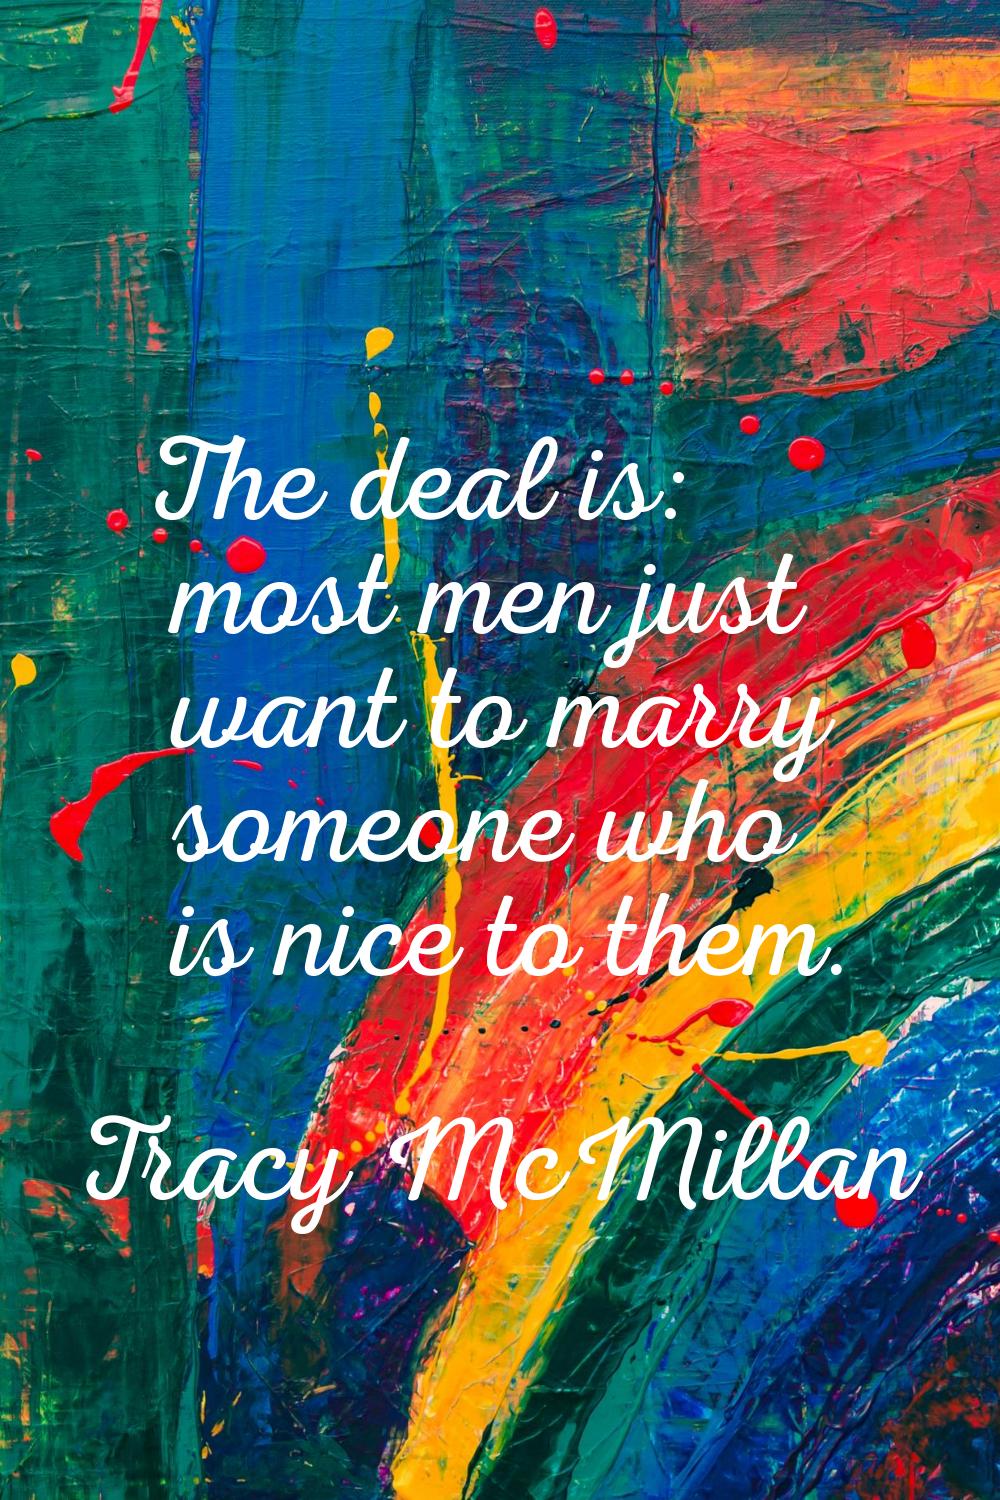 The deal is: most men just want to marry someone who is nice to them.